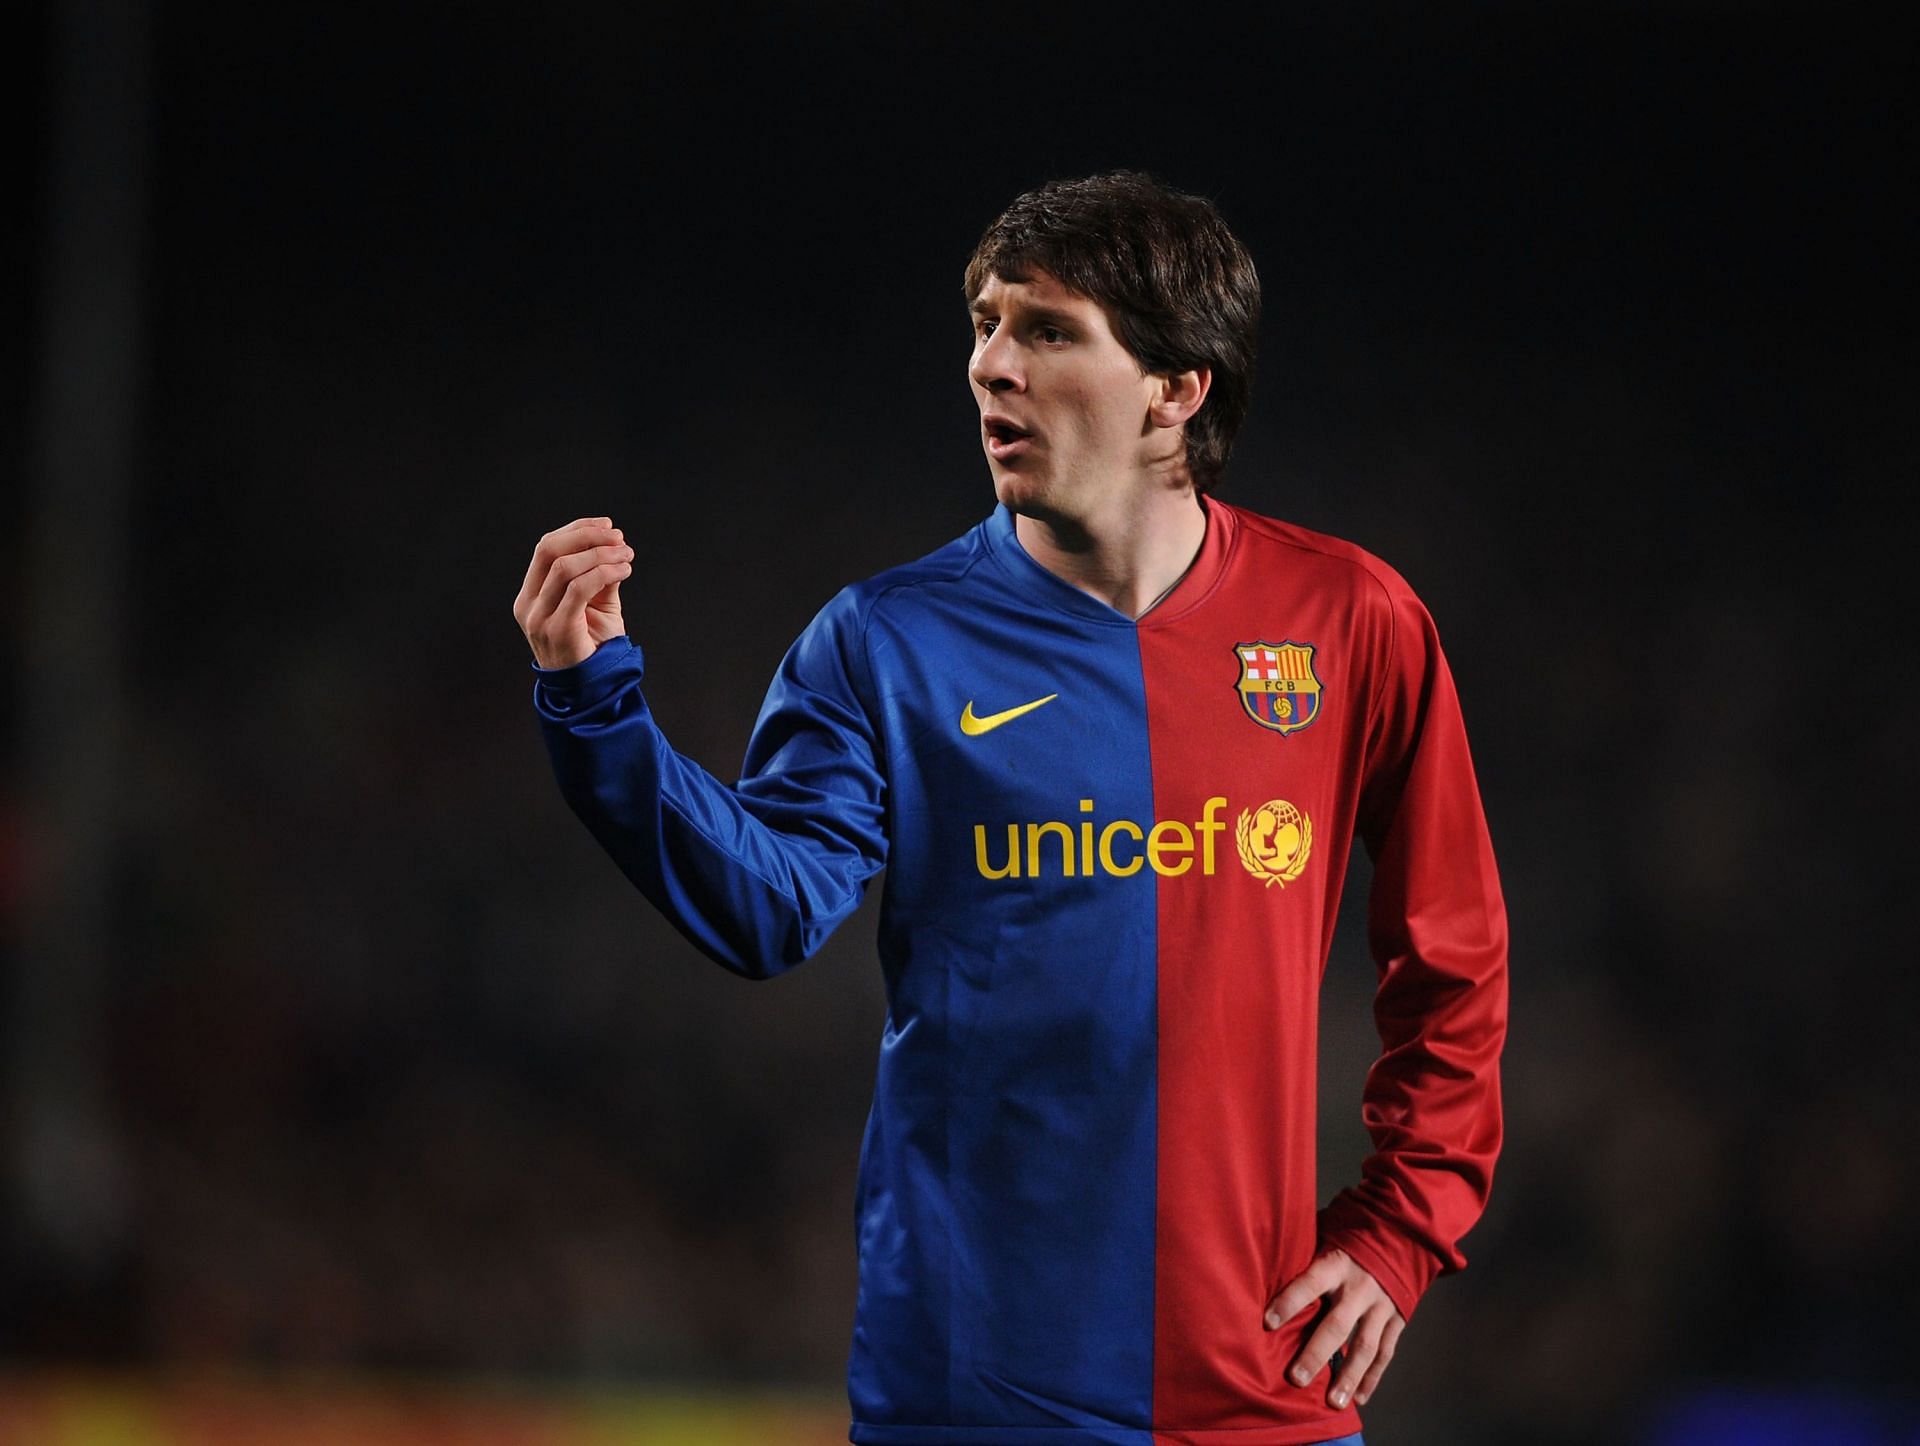 Lionel Messi during his younger days at Barcelona